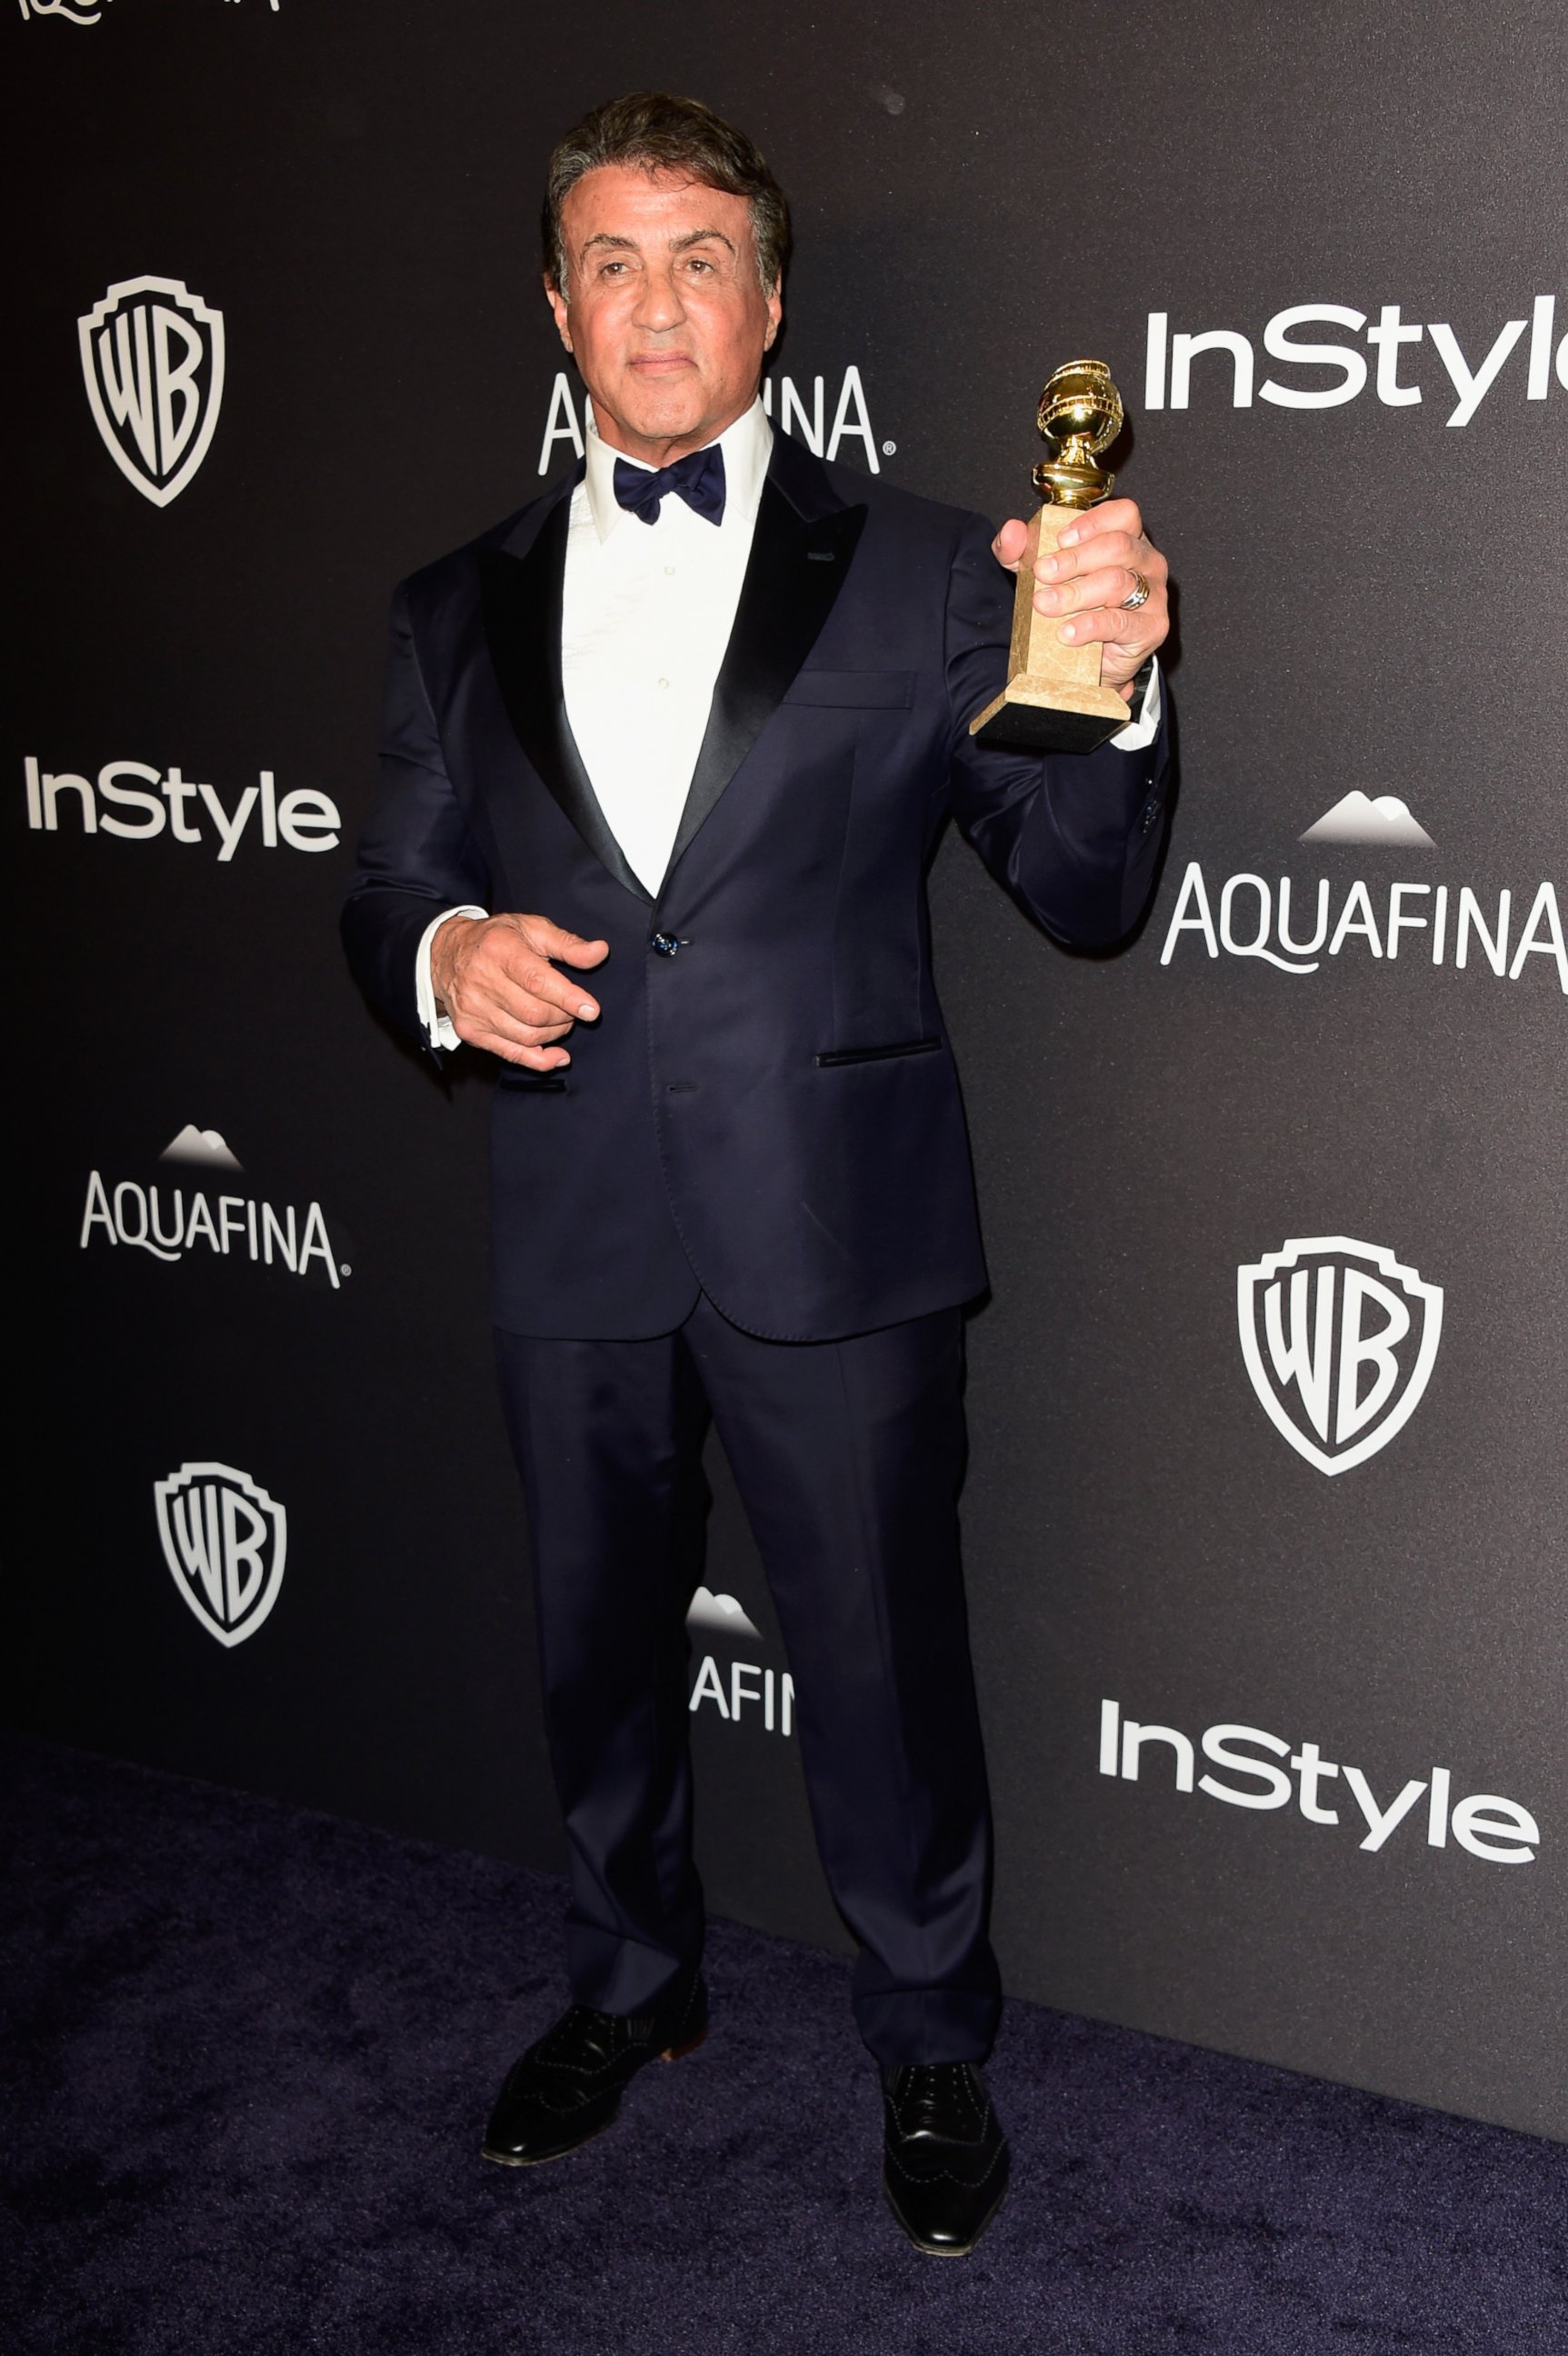 PHOTO: Sylvester Stallone attends 73rd Annual Golden Globe Awards Post-Party at The Beverly Hilton Hotel on Jan. 10, 2016 in Beverly Hills, Calif.